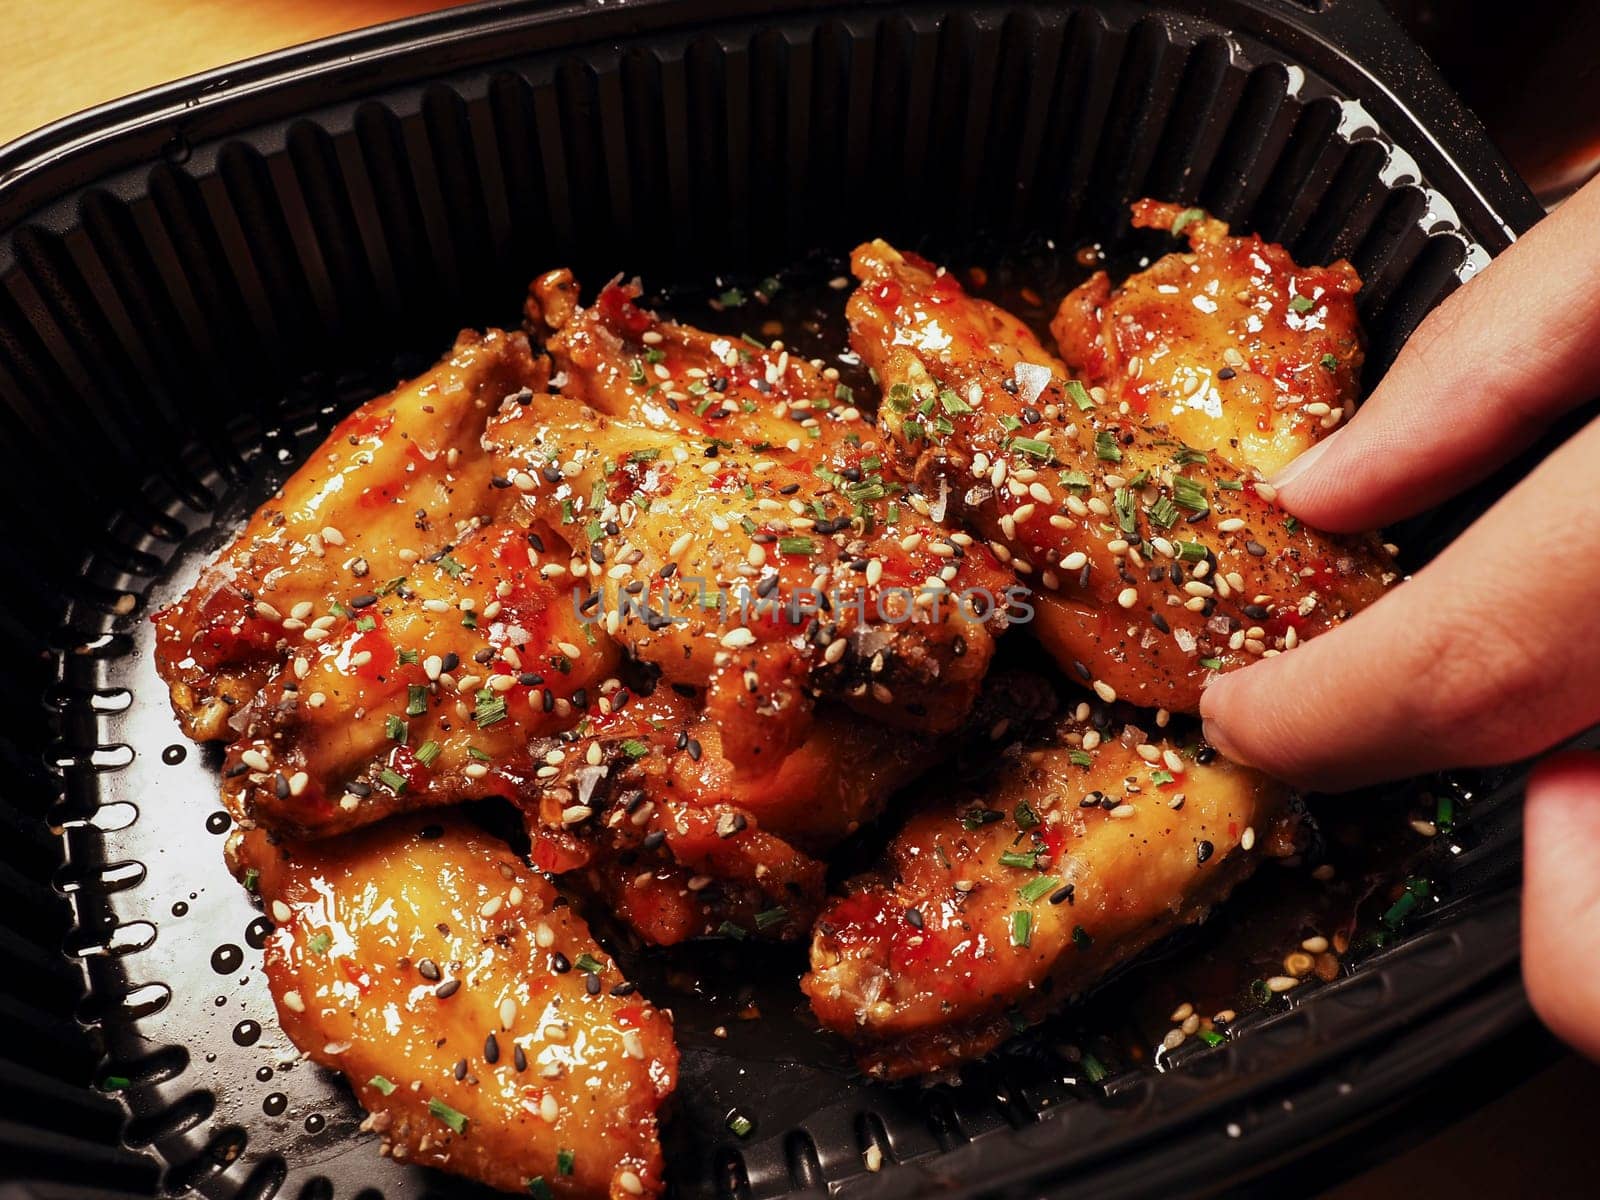 Man's hand picking up a Korean Chicken wings with sauce. 치킨. Asian food street . Delivery concept by ImagesRouges